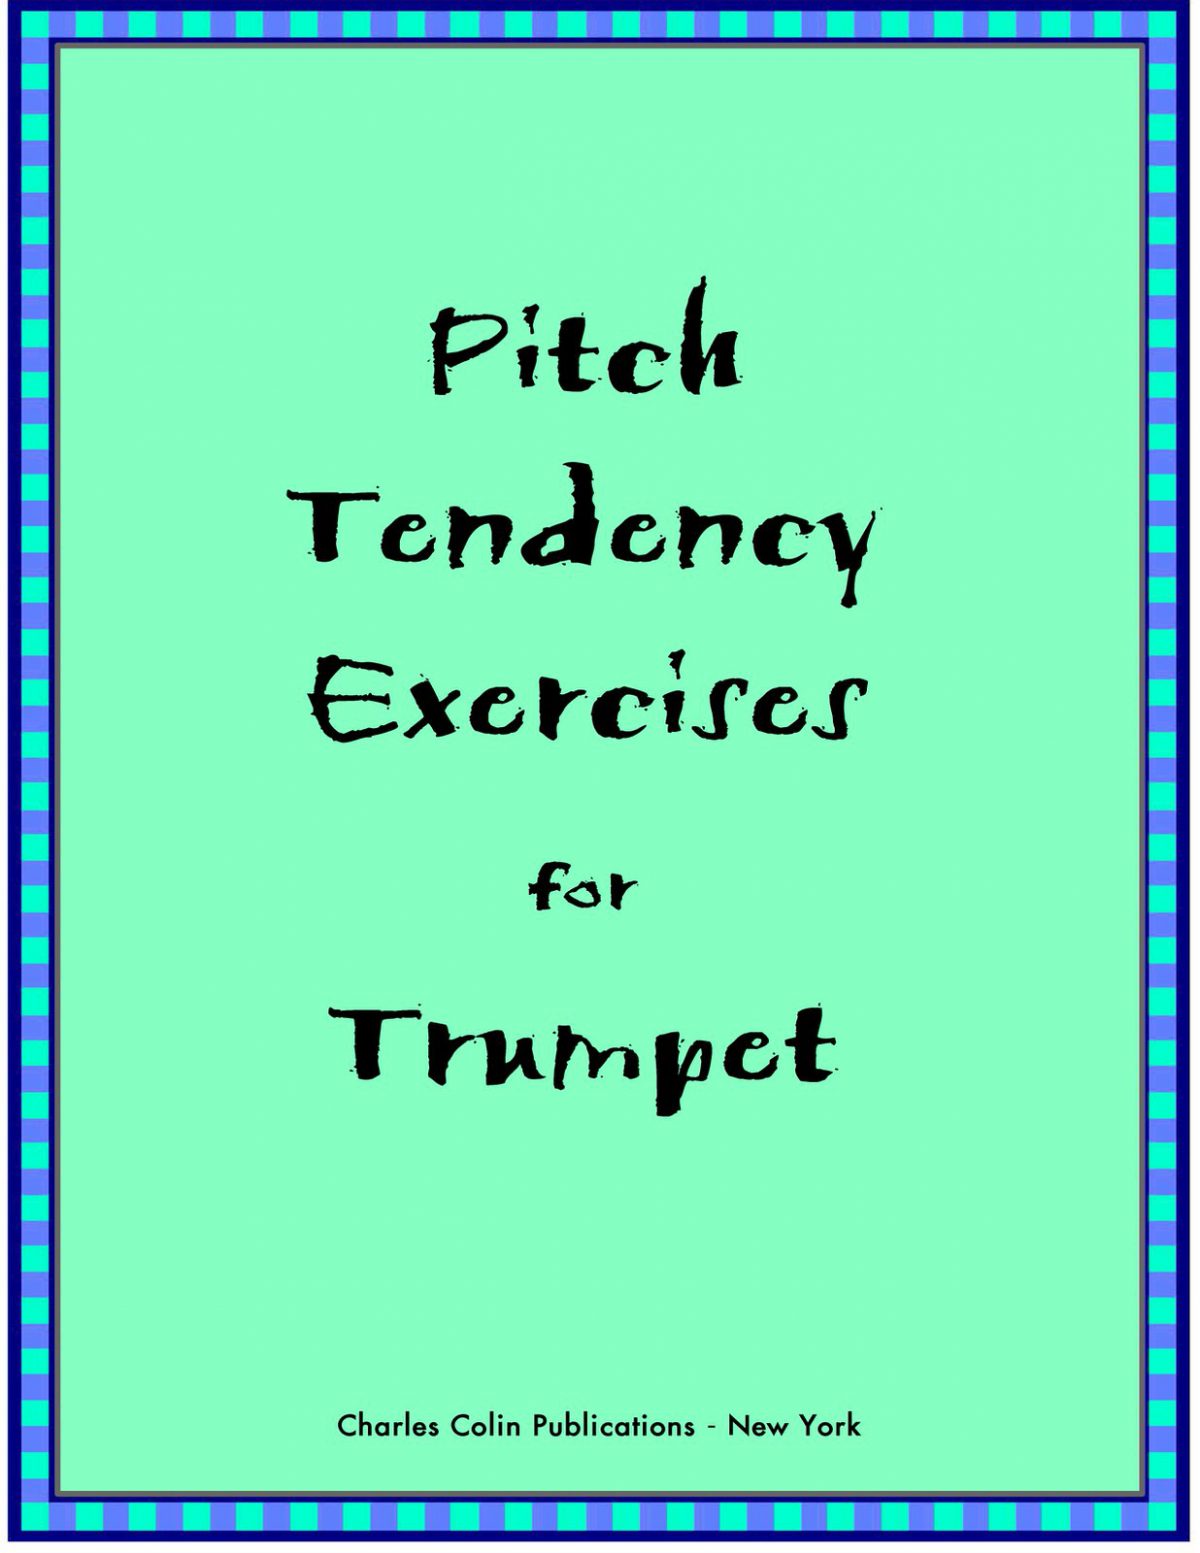 Ponzo, Pitch Tendency Exercises for Trumpet_000001